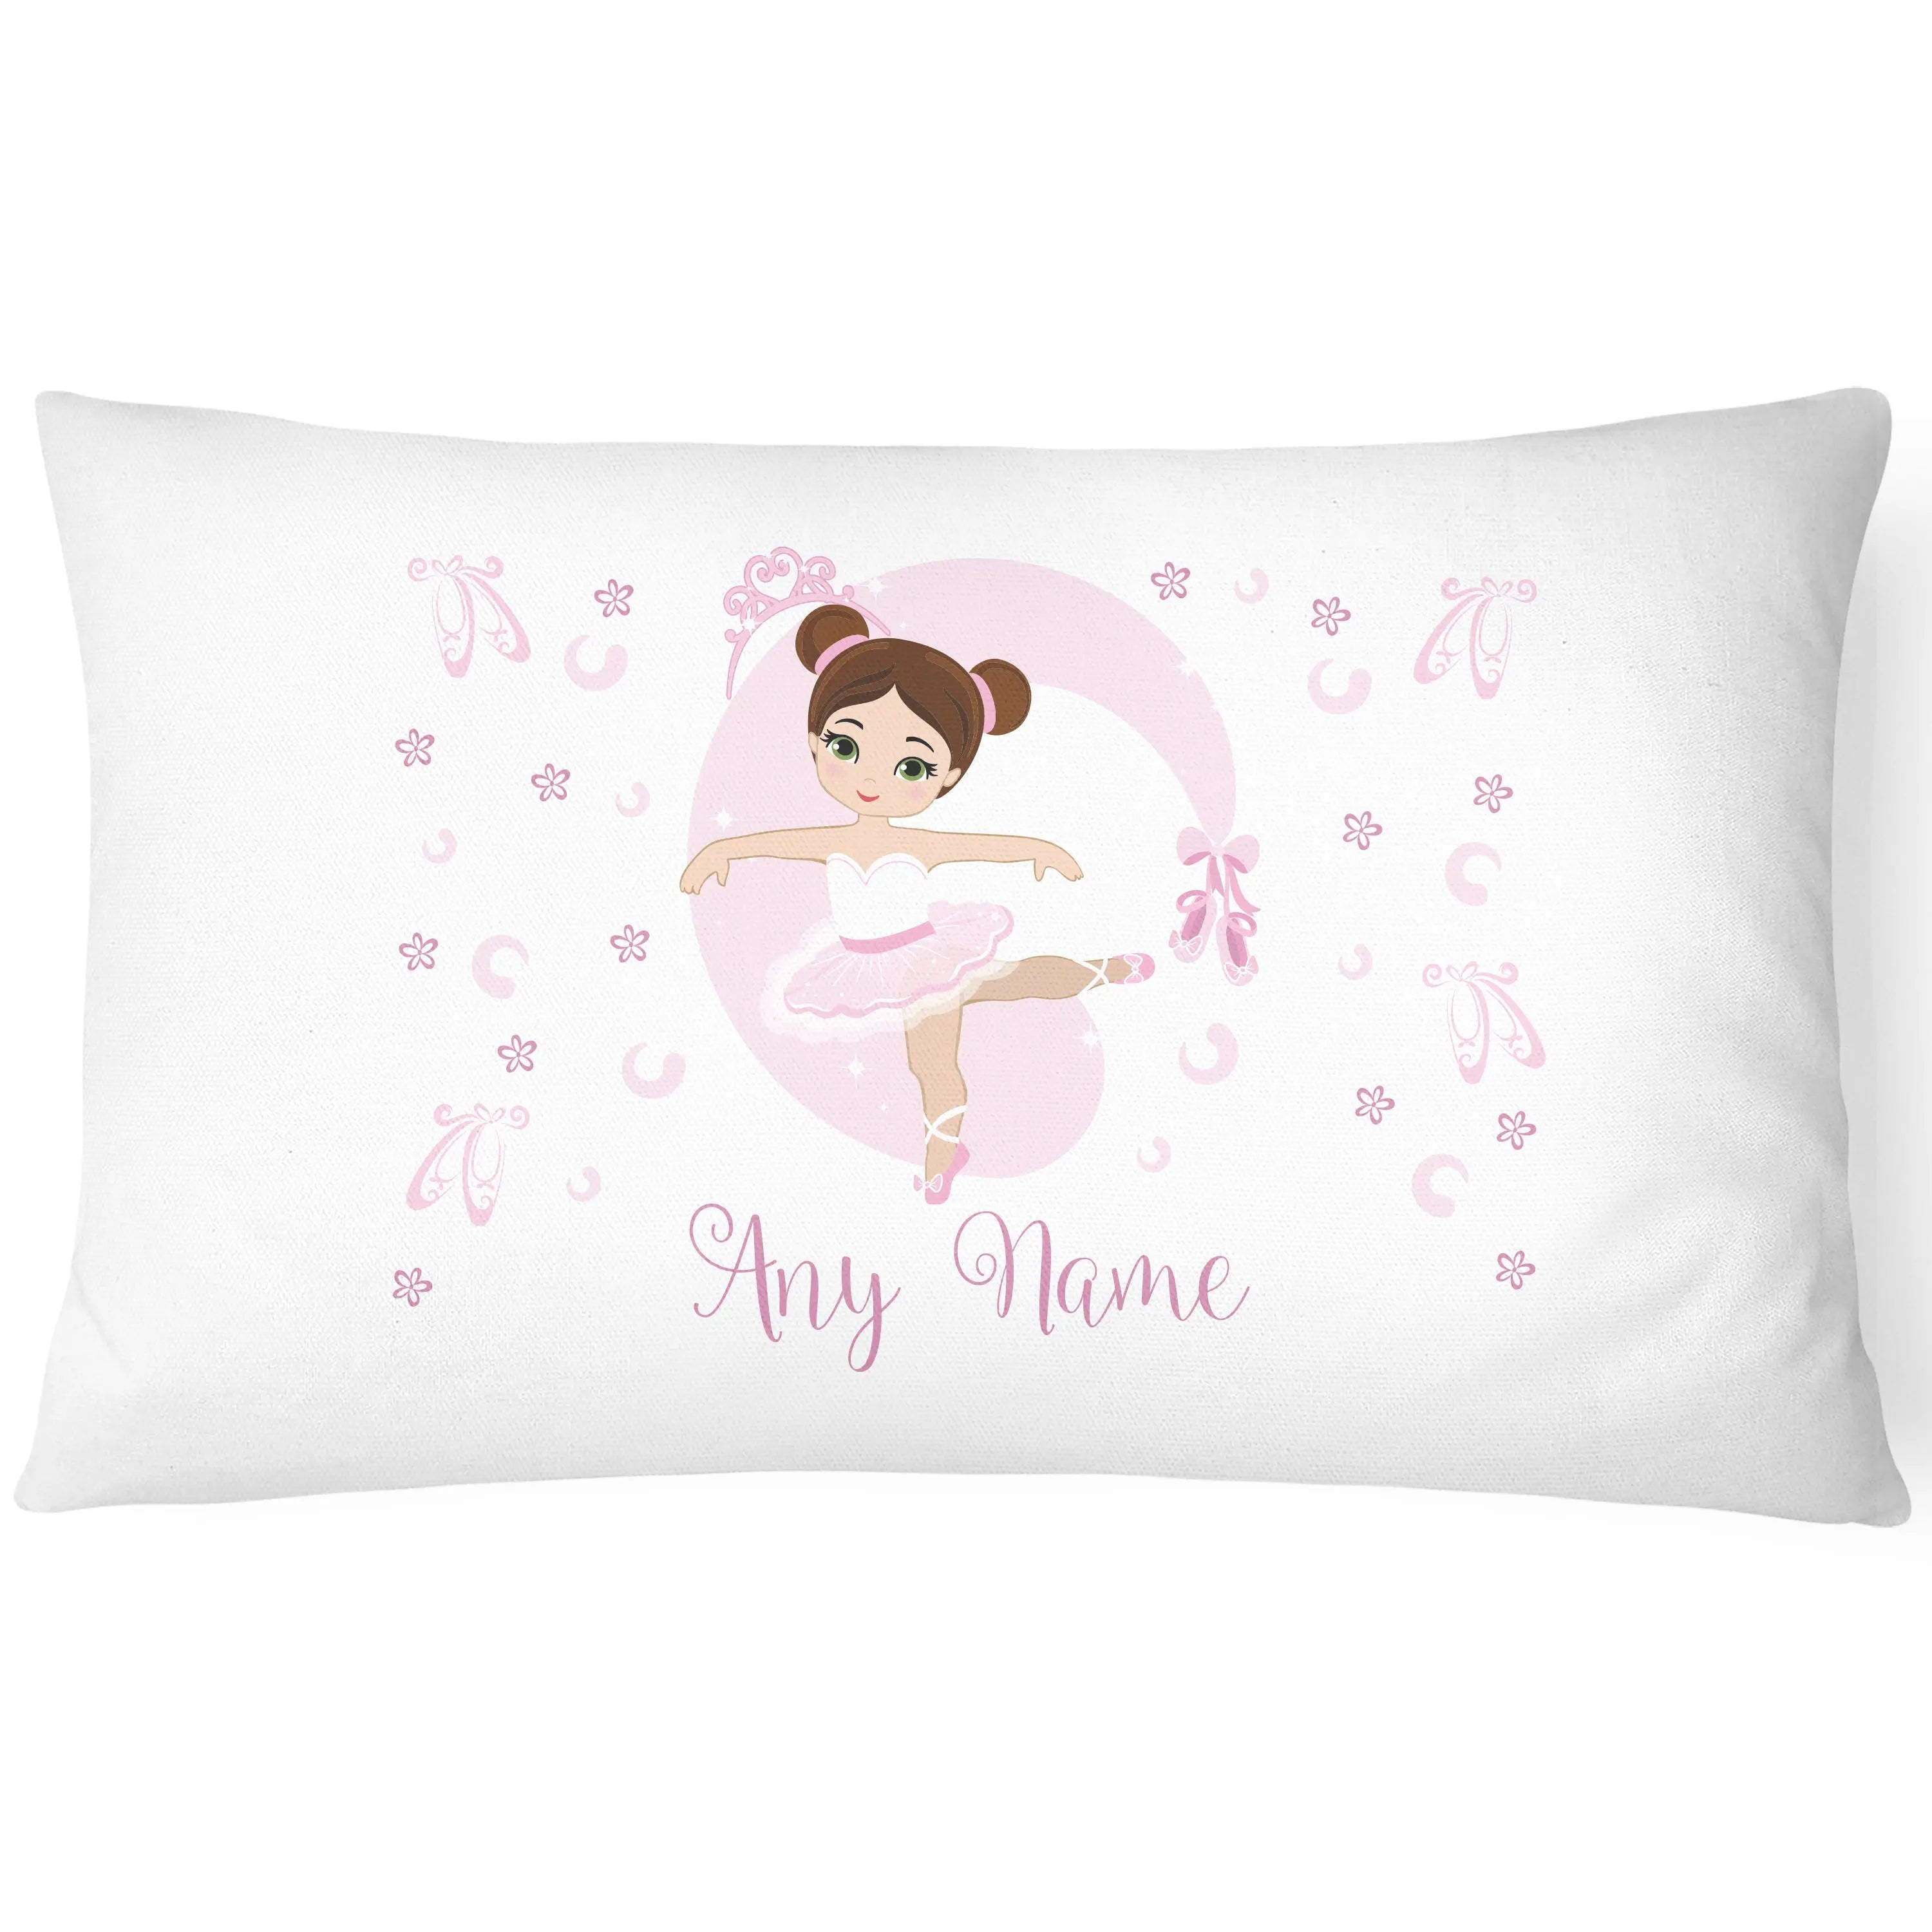 Ballerina Children's Pillowcase - Personalise with Any Name - Lovely